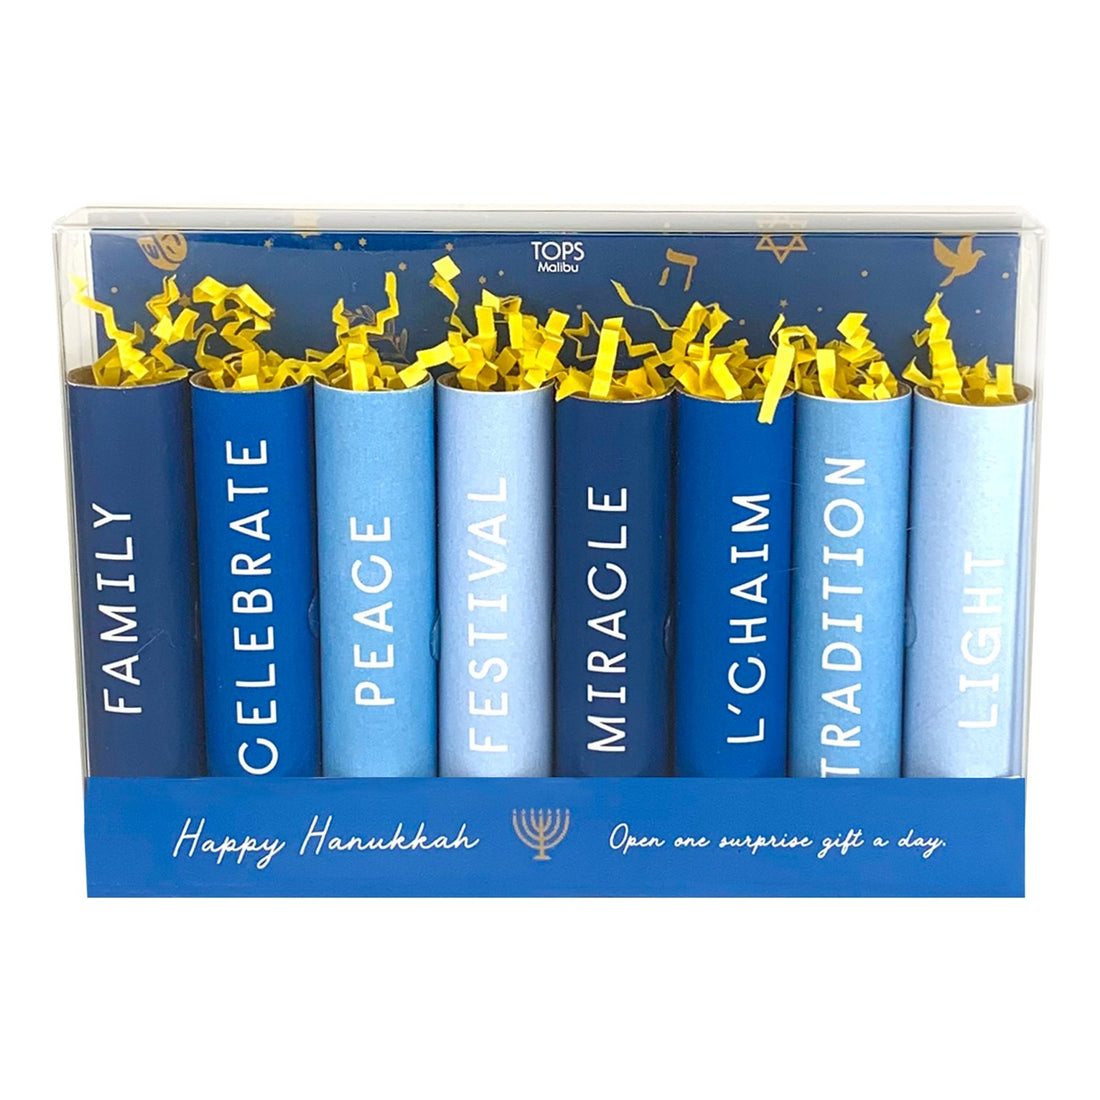 A set of blue Happy Hanukkah Festival of Lights-themed crackers with festive words and decorations in a box, perfect for holiday presents, wishing &quot;Happy Hanukkah. Brand Name: Tops Malibu